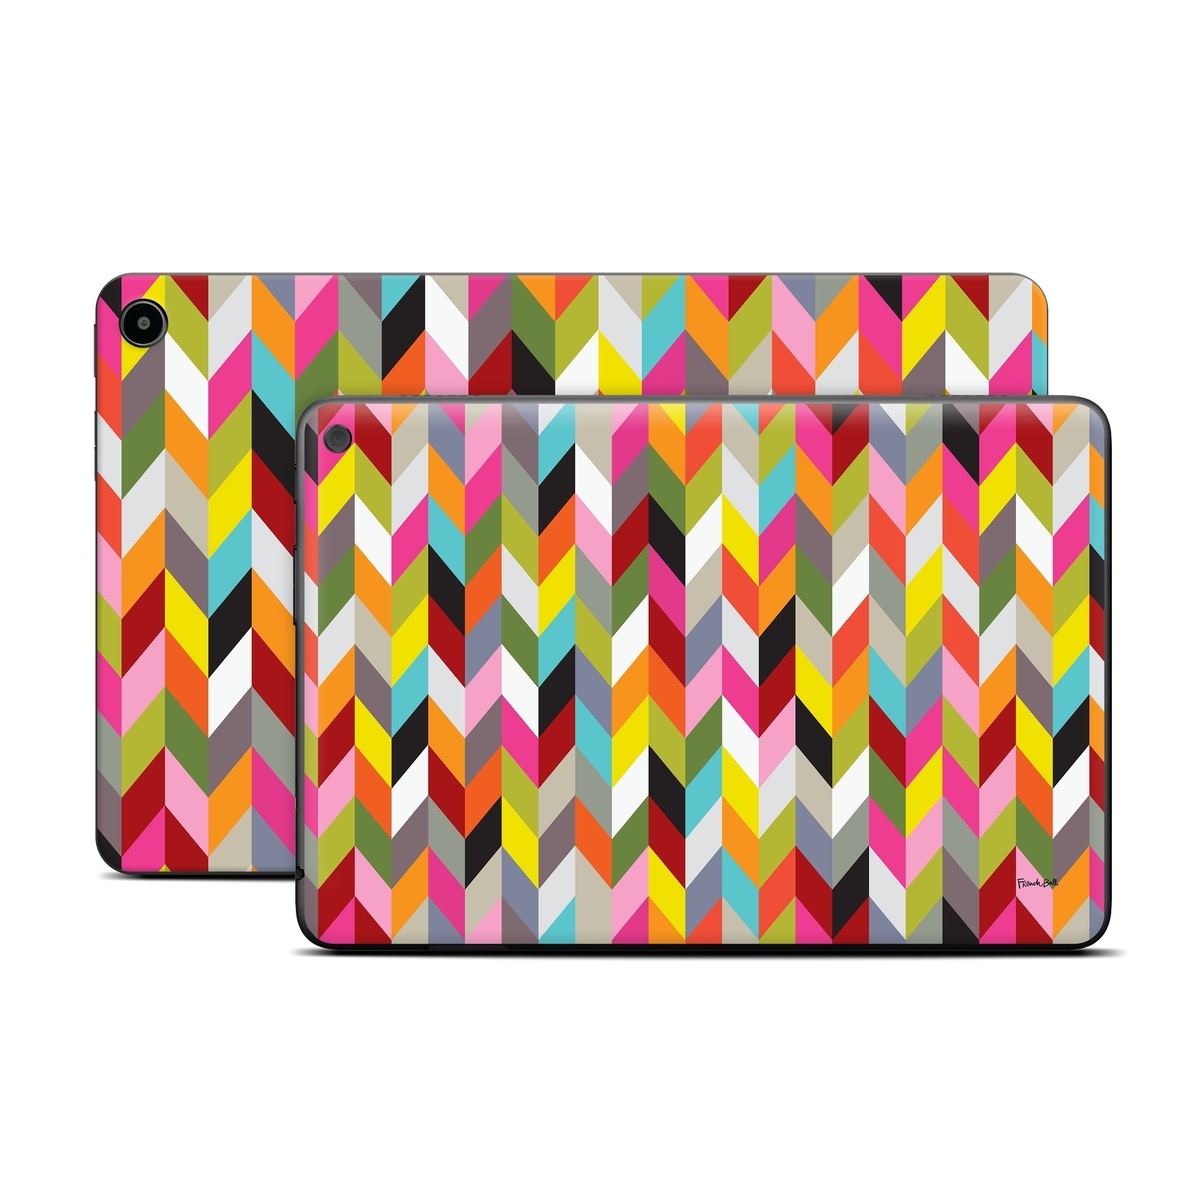 Amazon Fire Tablet Series Skin Skin design of Pattern, Orange, Line, Design, Graphic design, Tints and shades, Triangle, with red, green, gray, black, blue, purple colors